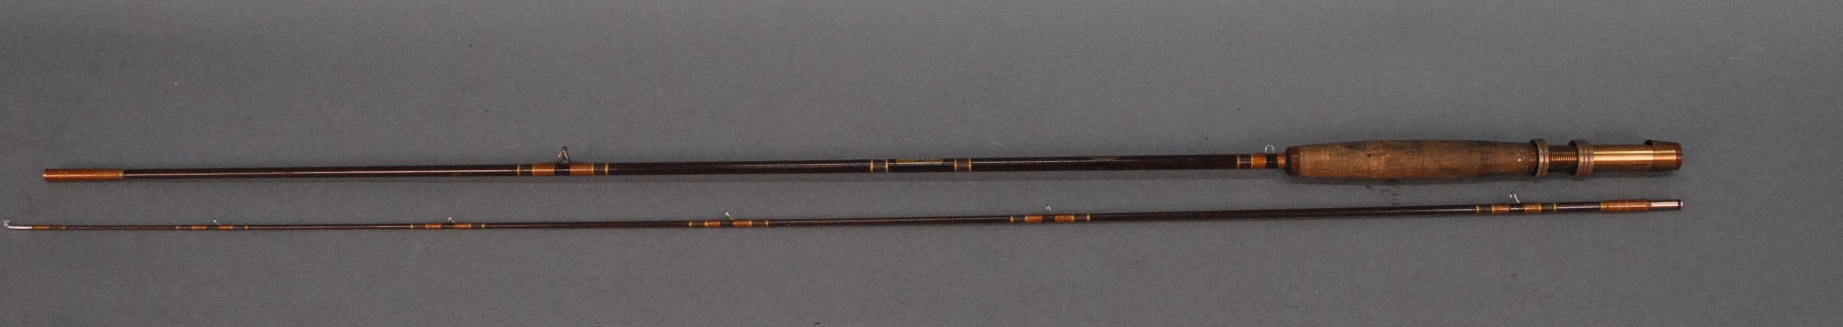 Lot 100: Vintage Browning silaflex two piece fly rod, model 222975. -  Nadeau's Auction Gallery